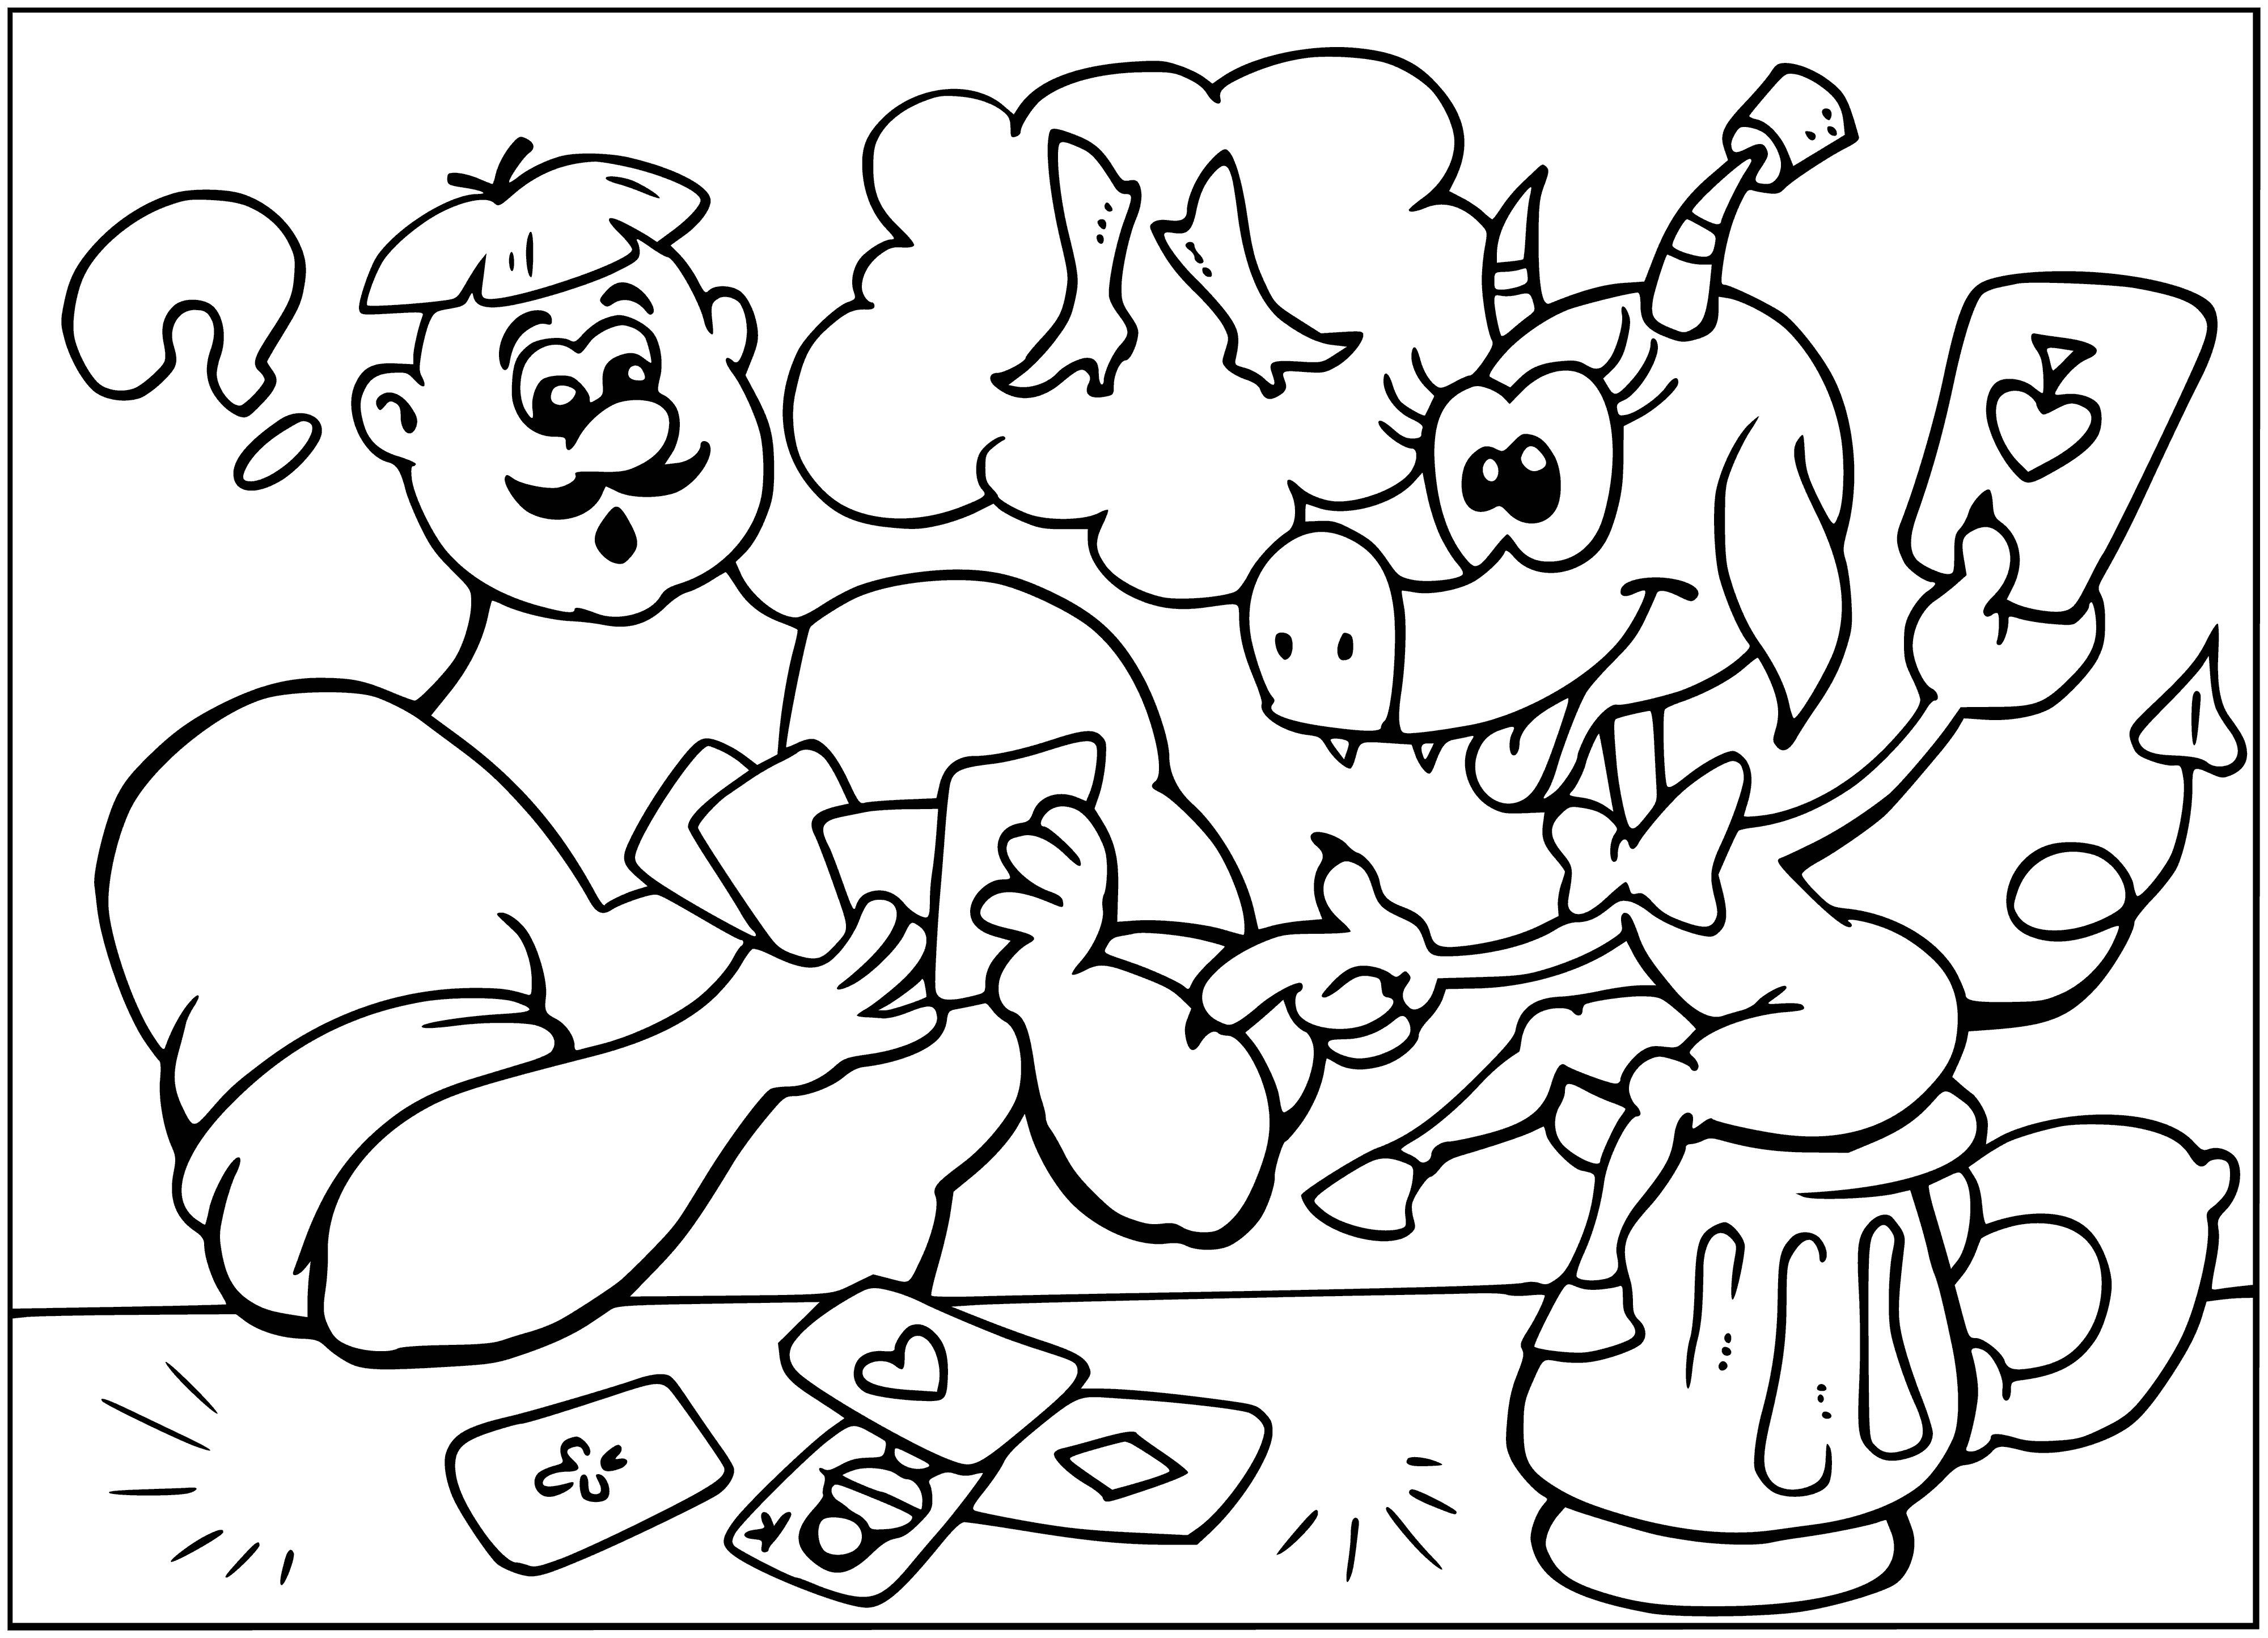 coloring page: Three Cossacks by a campfire in the woods, singing and chanting, playing a drum - creating an eerie atmosphere of something evil soon to come.